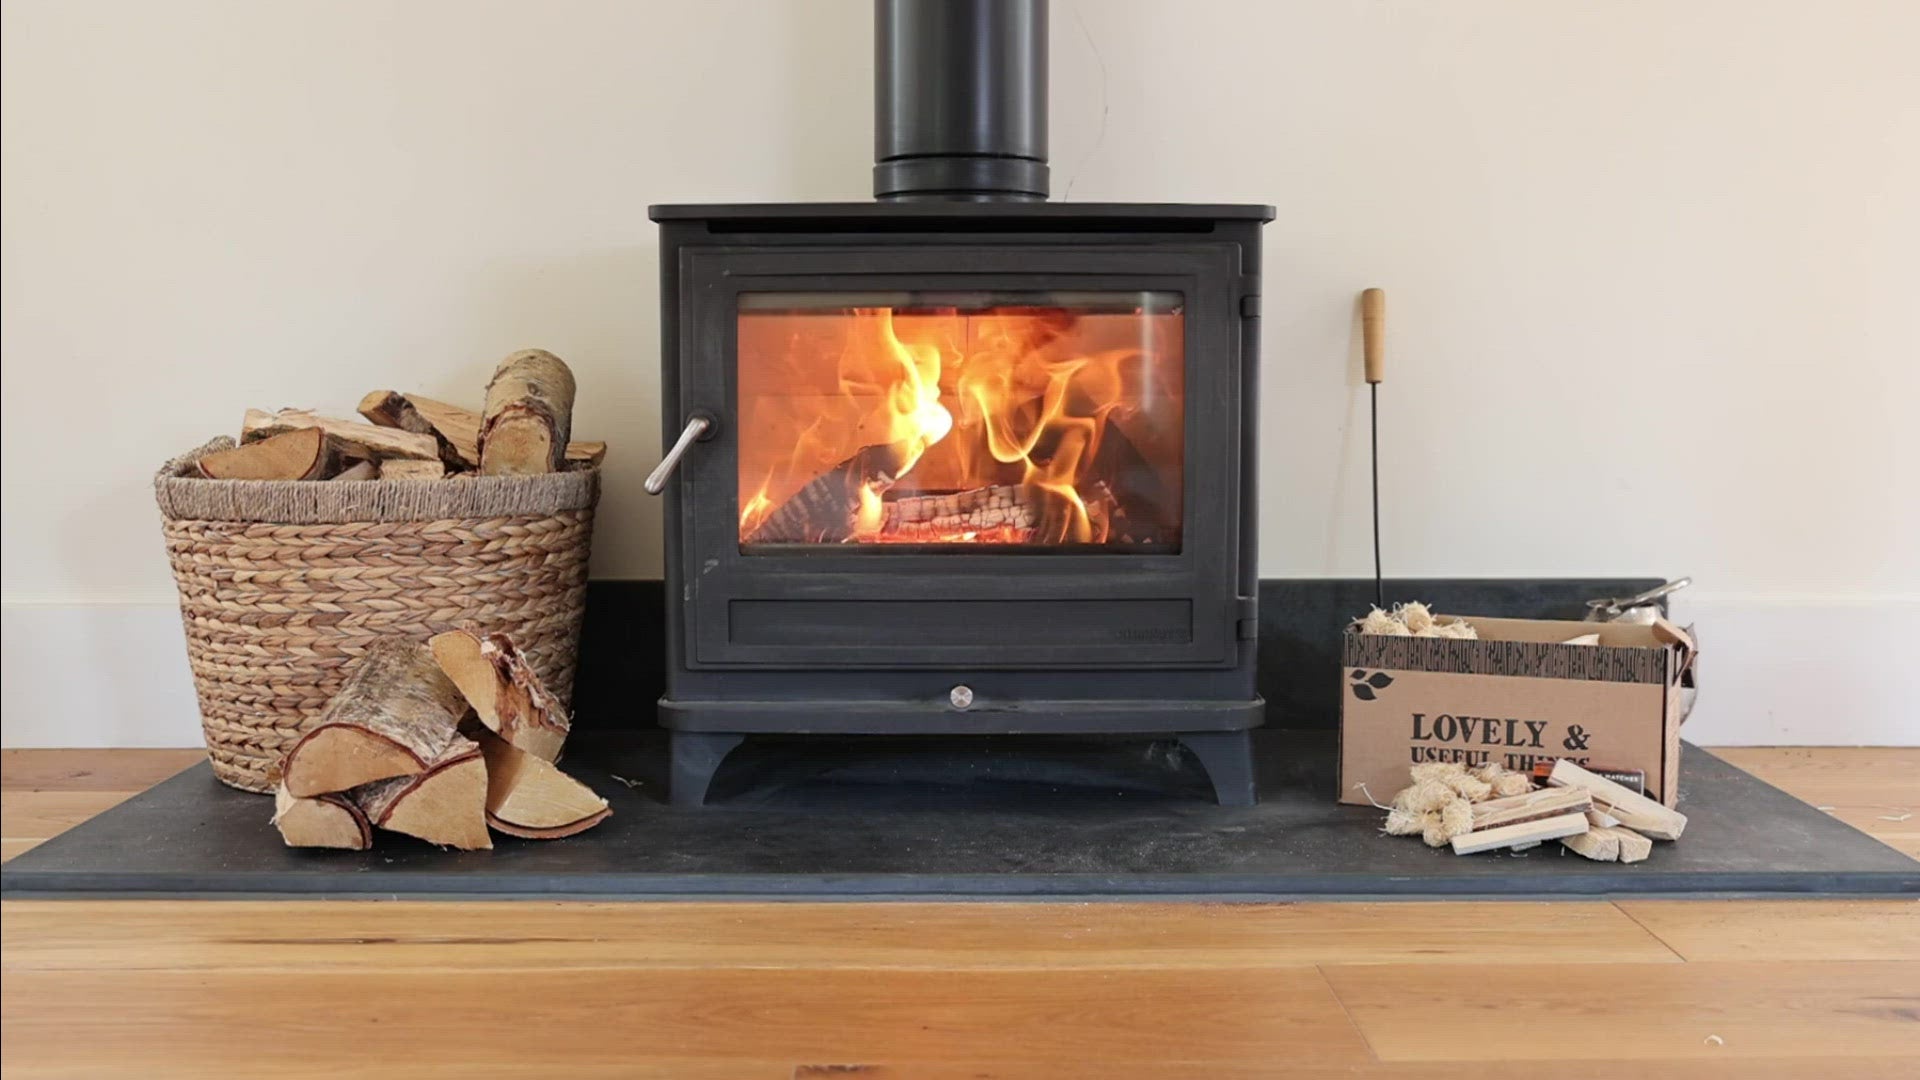 Kiln dried wood, gives hot flames, sold by Logpile.